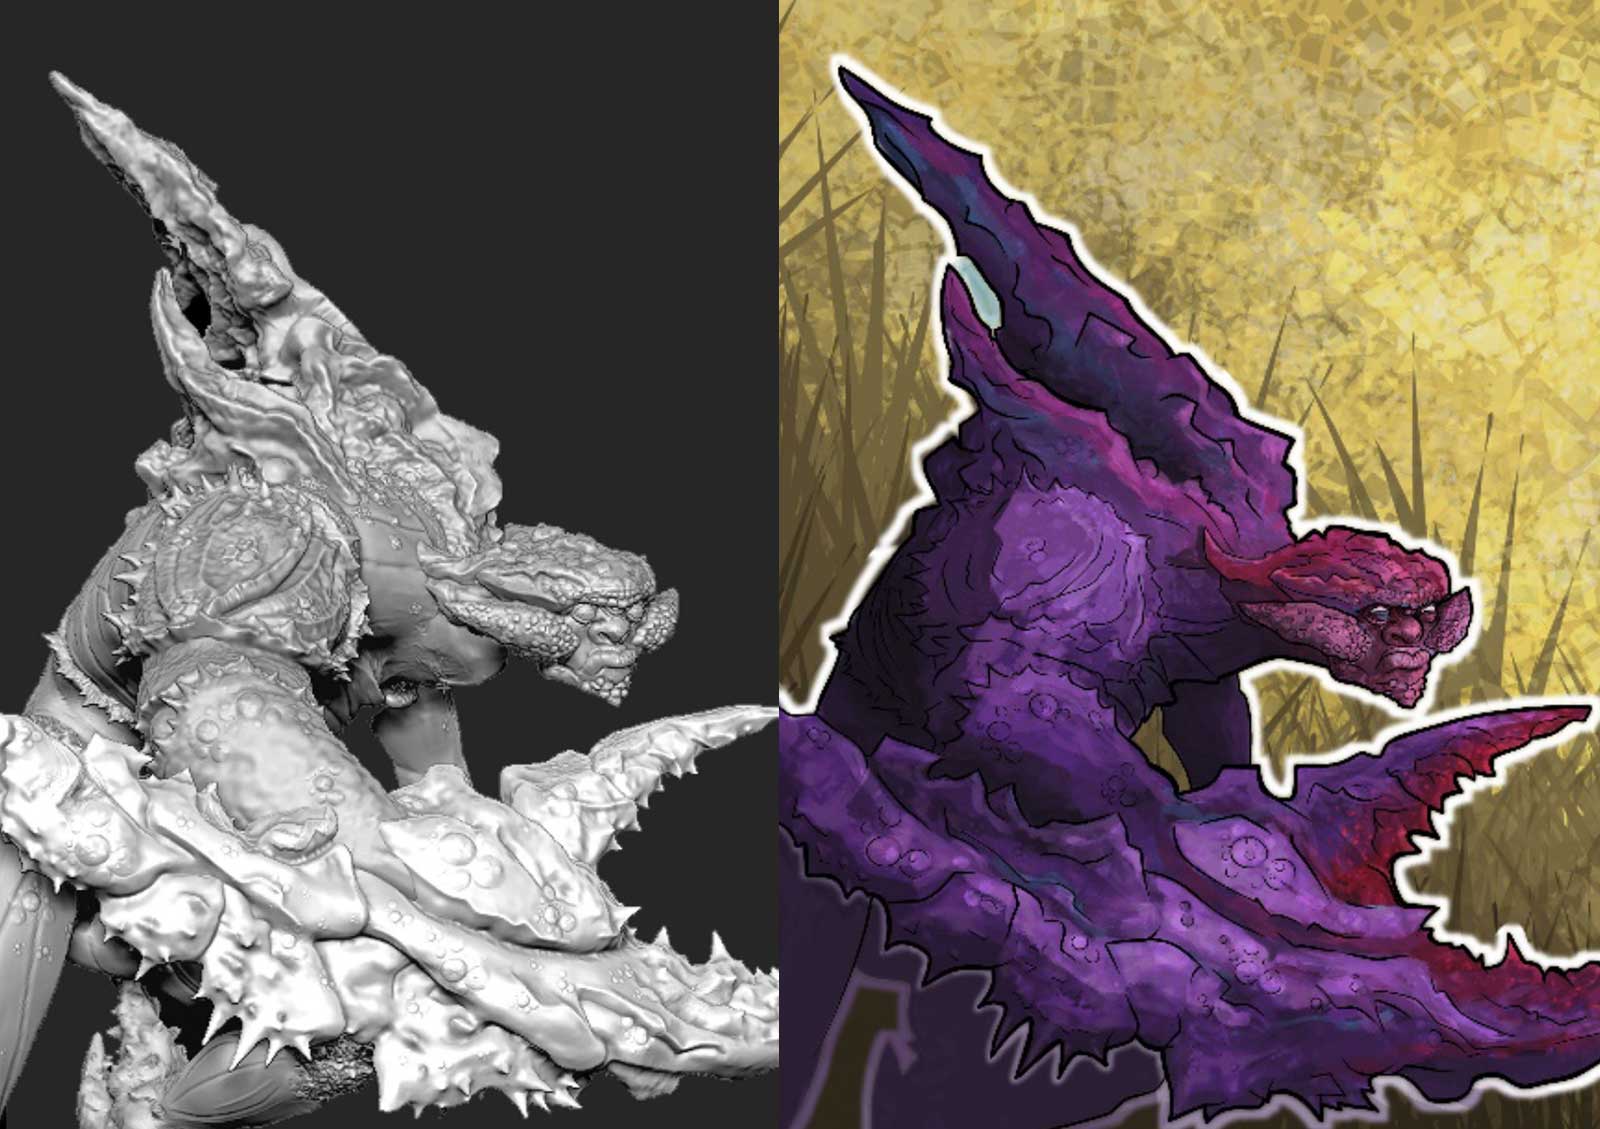 A 2D drawing of a purple crab monster next to a gray 3D model version of the same creature.